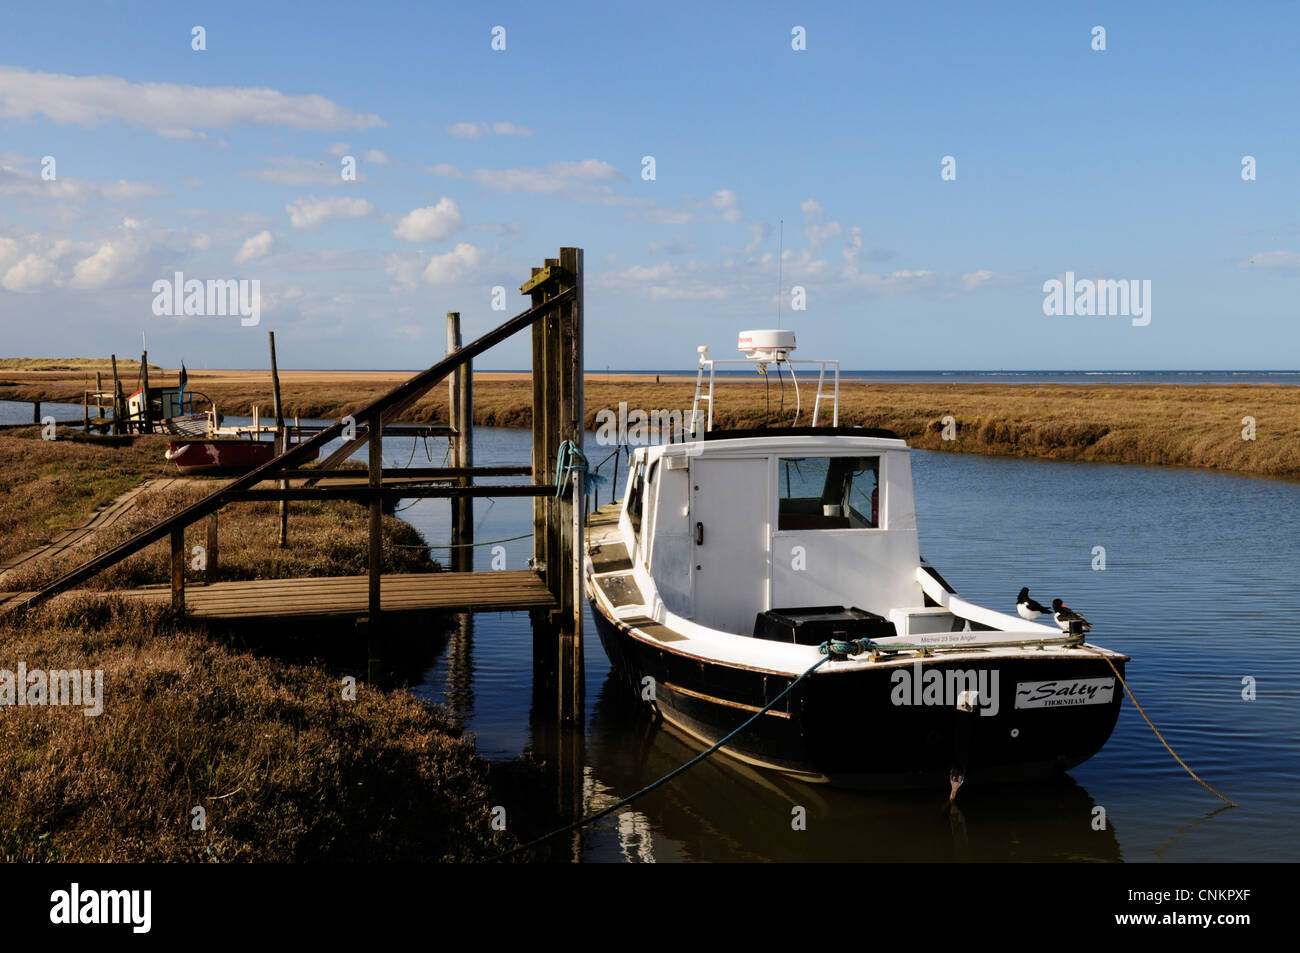 Boats in The Harbour, Thornham, Norfolk, England, UK Stock Photo